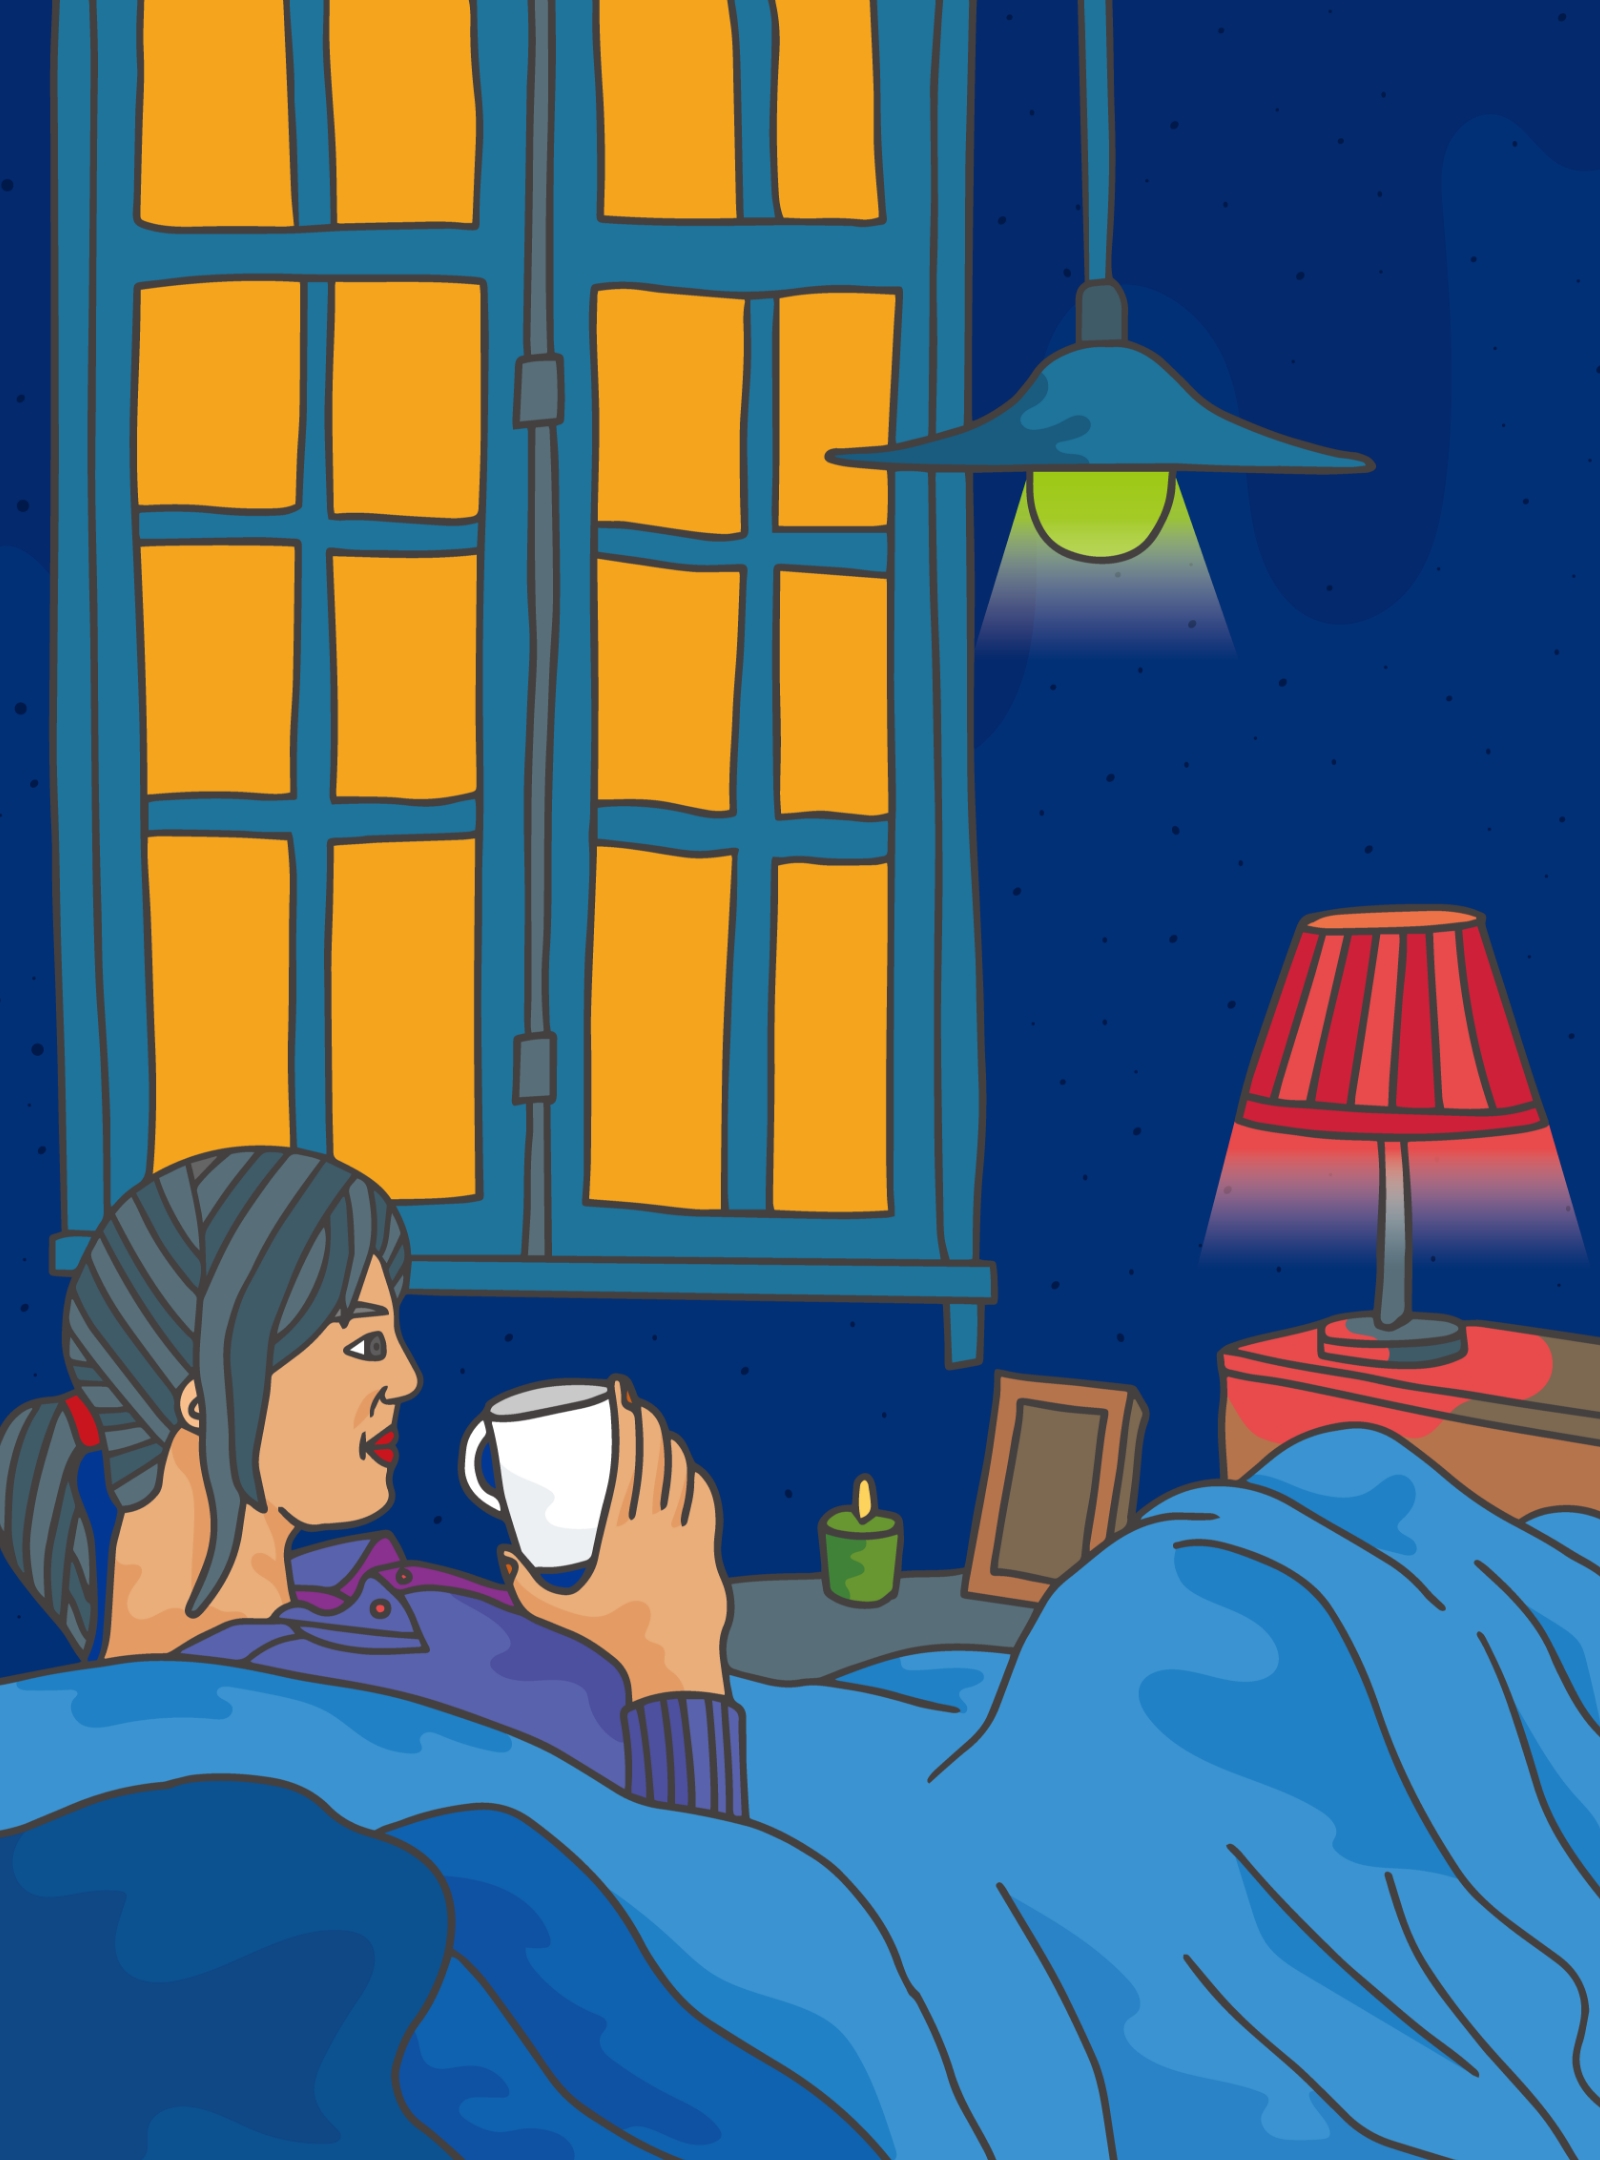 This is an illustration of a scene where a person who has difficulty hearing various sounds recognizes an alarm through lighting through a SmartThings